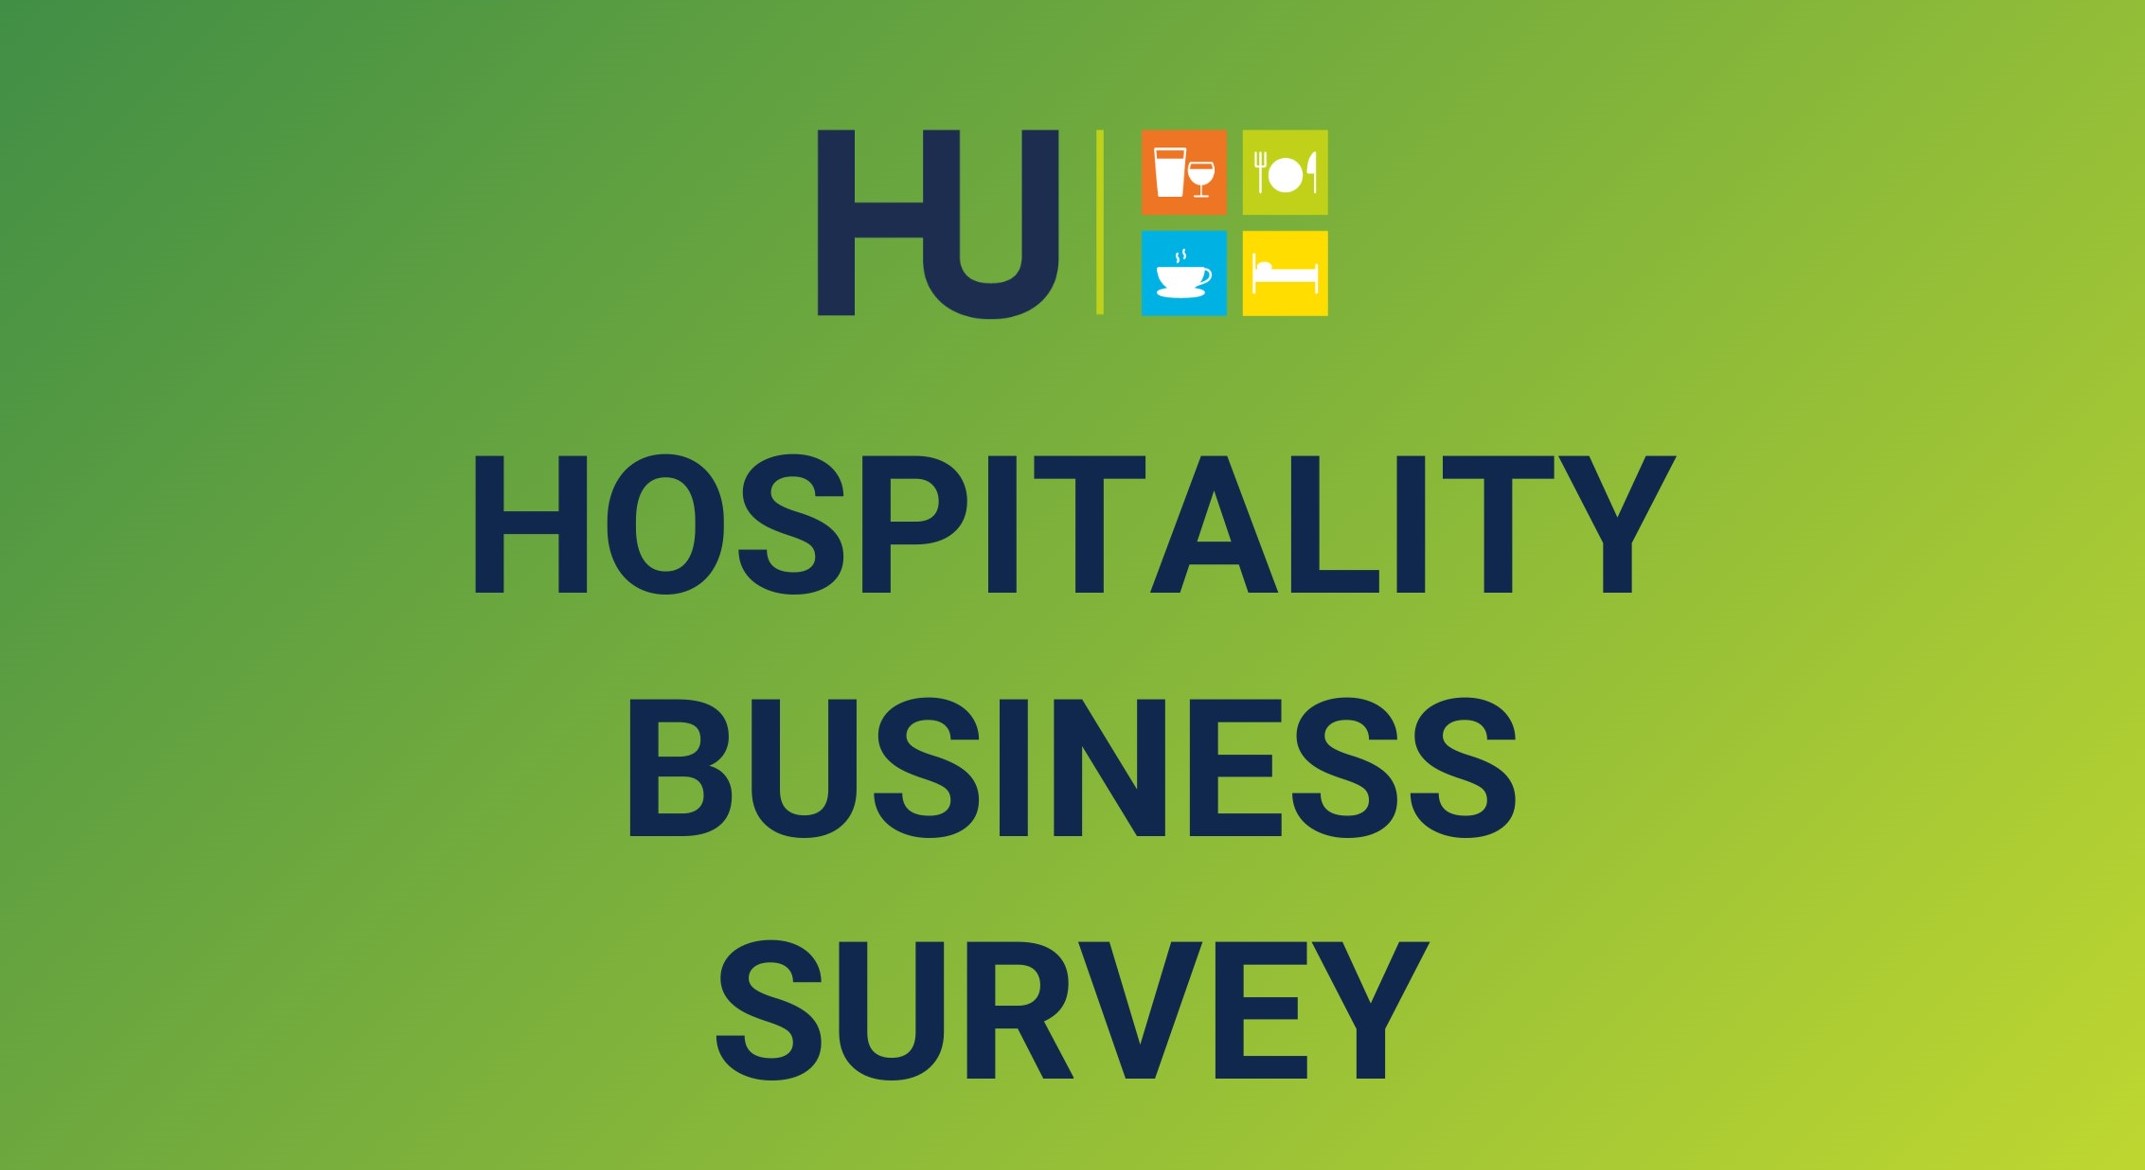 HOSPITALITY BUSINESS SURVEY - YOUR INPUT MAKES THE DIFFERENCE